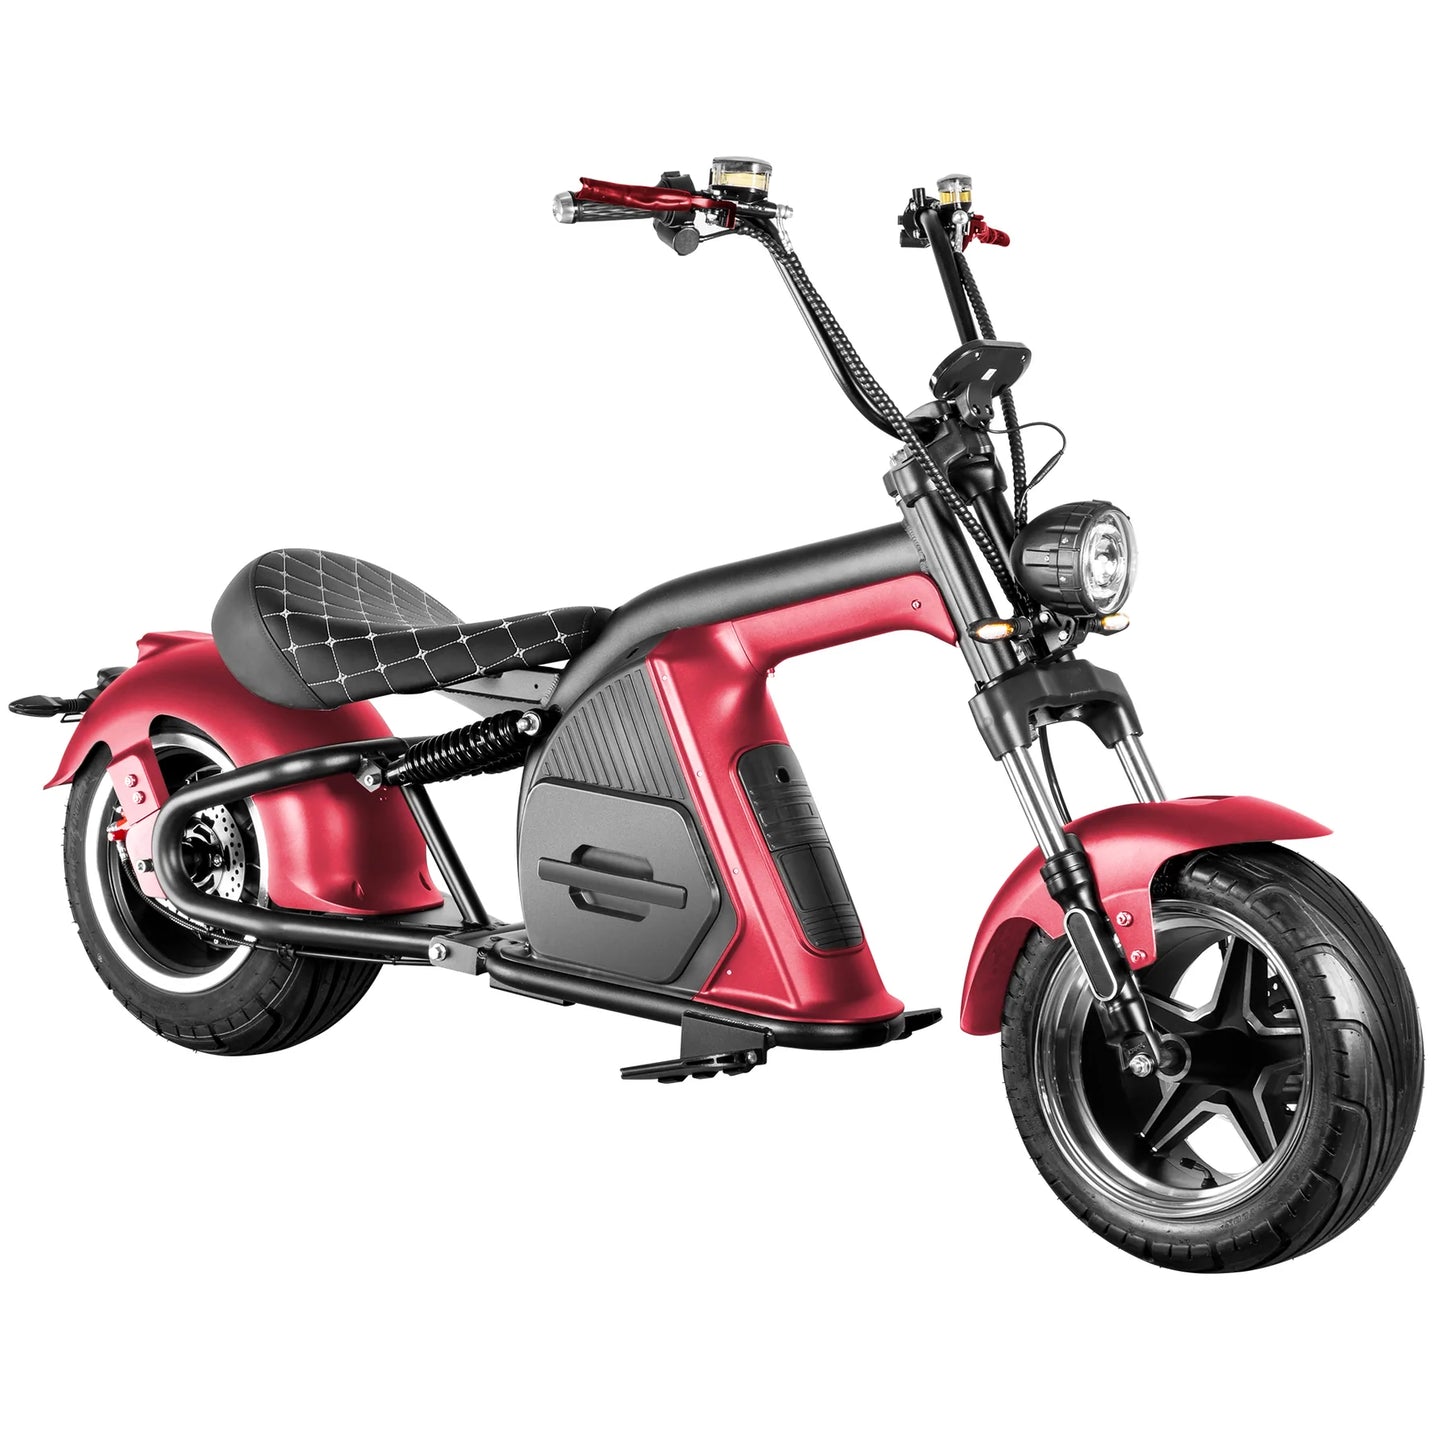 Eahora Emoto M8 Electric Scooter - Red | Bike Lover USA